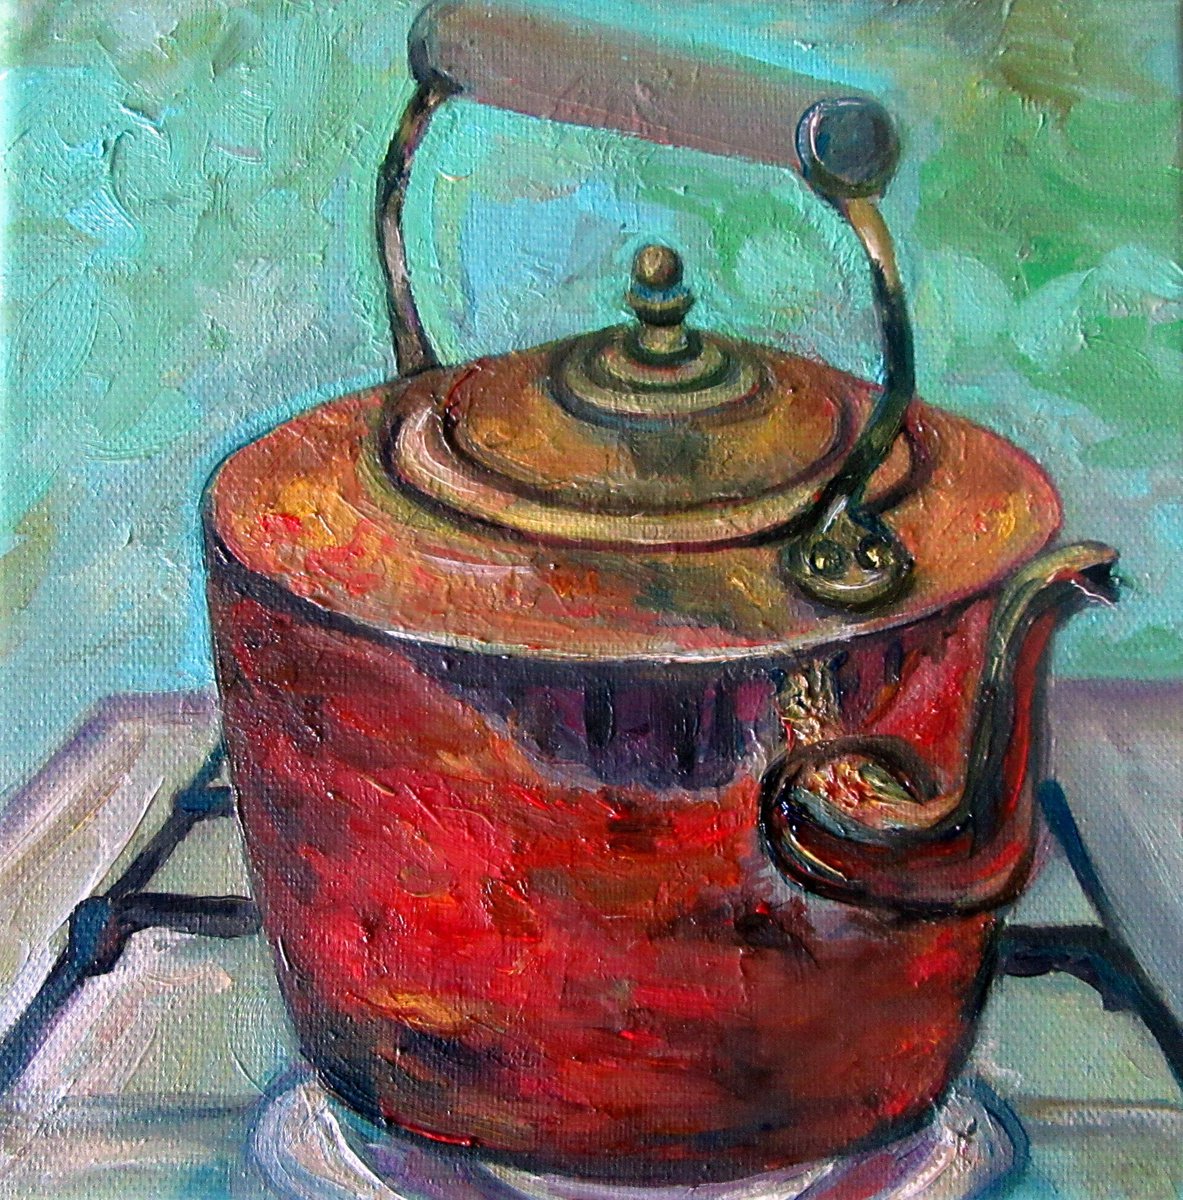 A Brass Kettle on a Cooking Stove by Katia Ricci